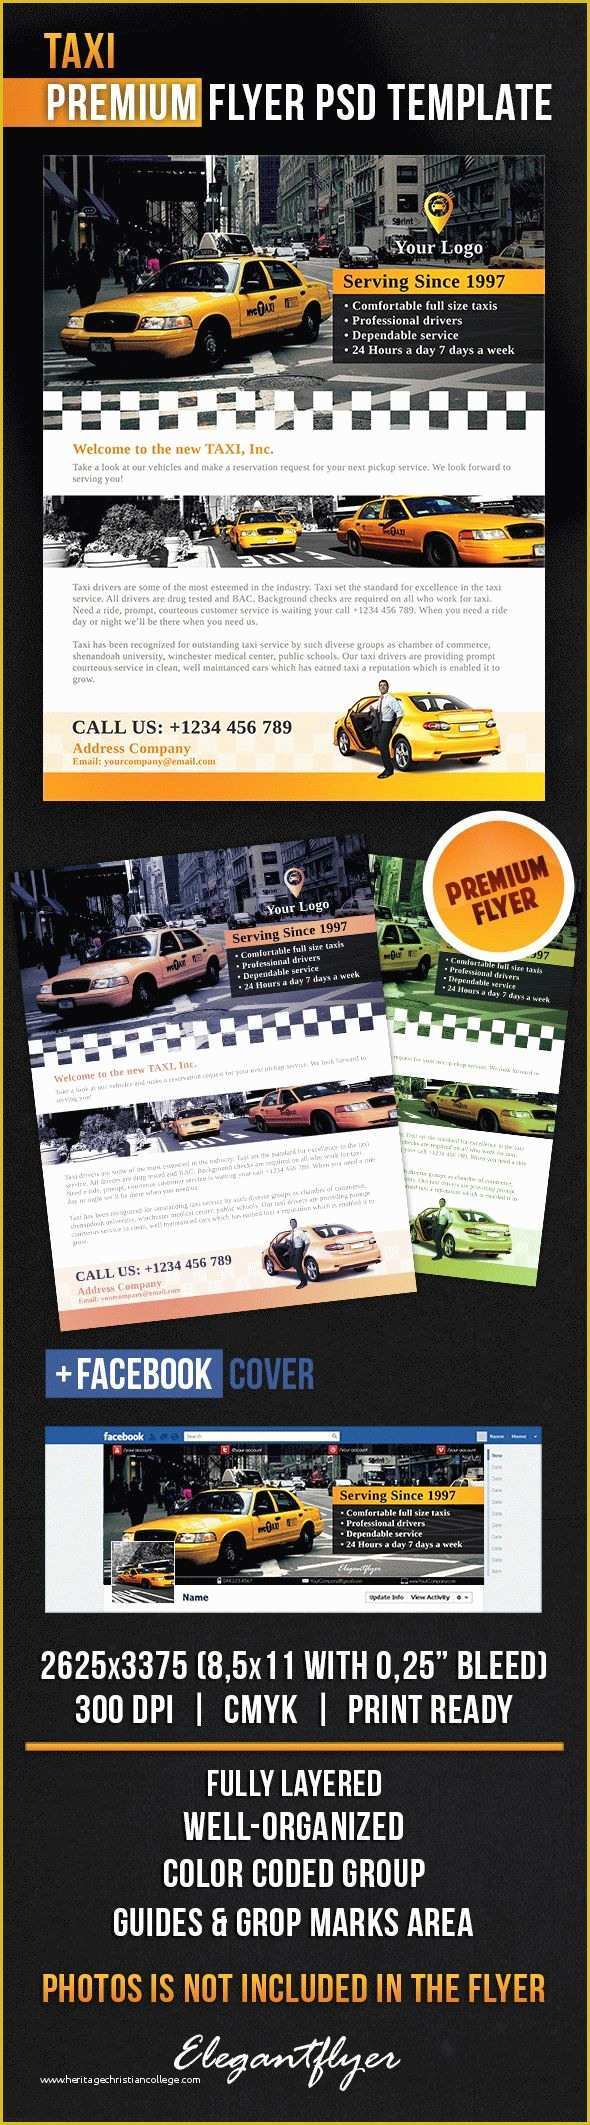 Facebook Ad Template Psd Free Of Taxi Flyer Psd Template Cover